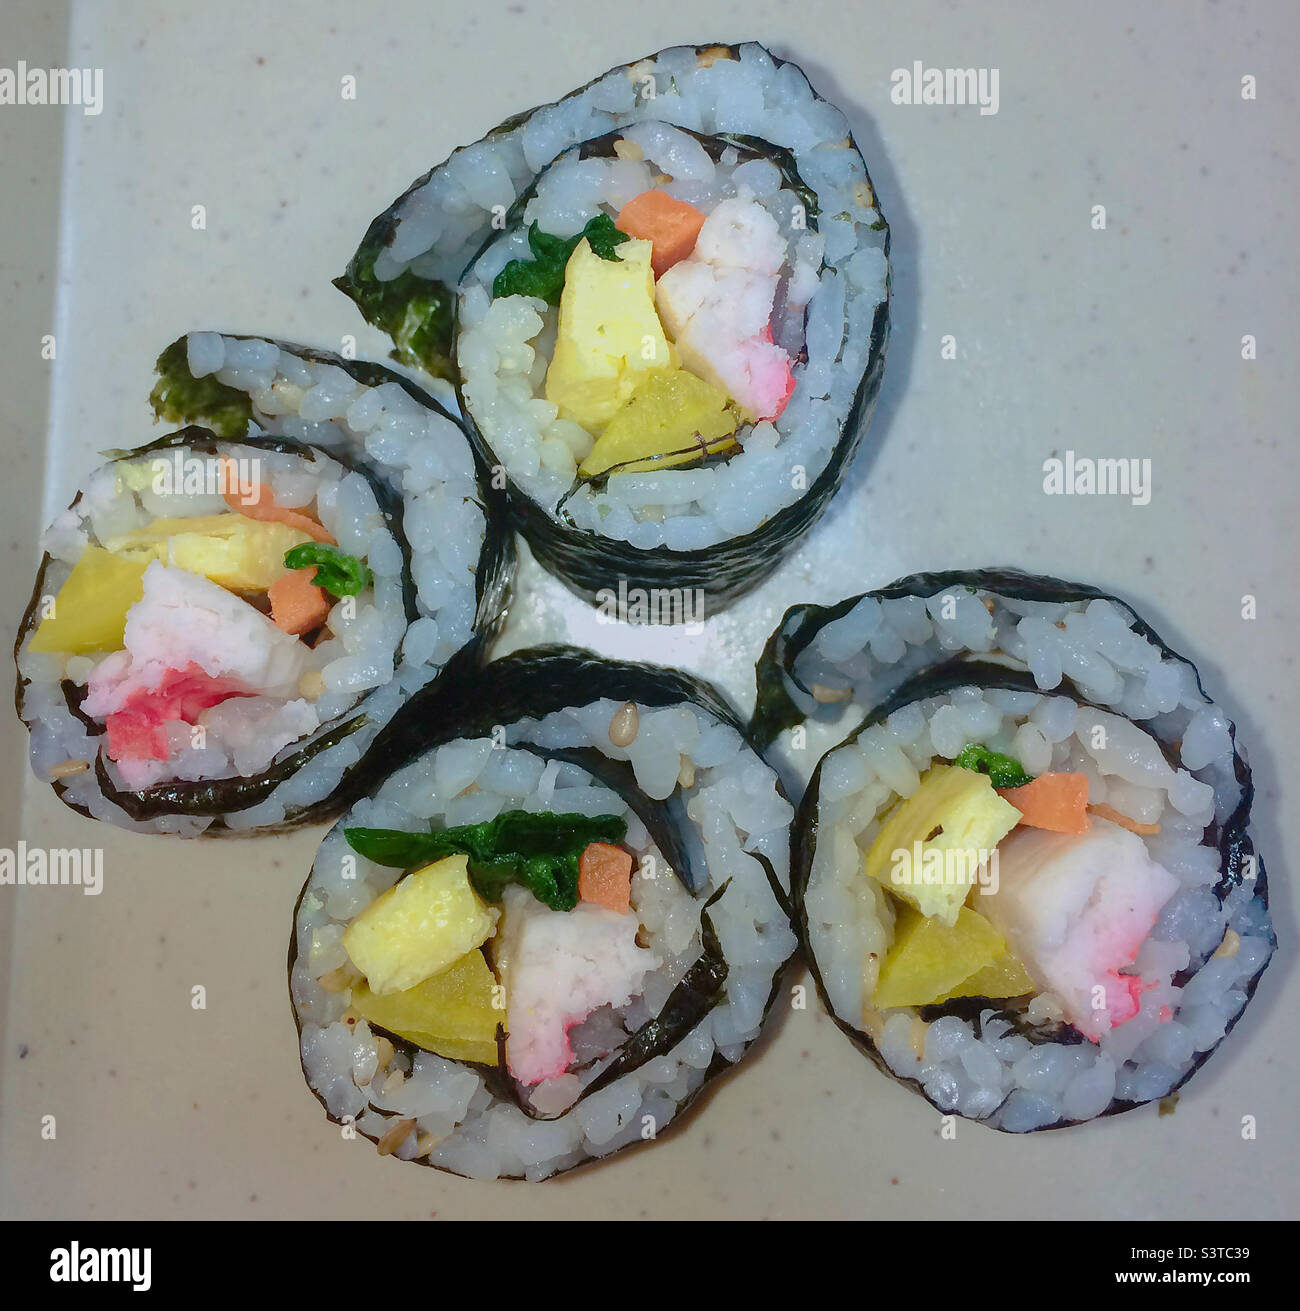 Kimbap is a Korean dish made from cooked rice and ingredients such as vegetables, fish, and meats that are rolled in gim—dried sheets of seaweed—and served in slices. Stock Photo